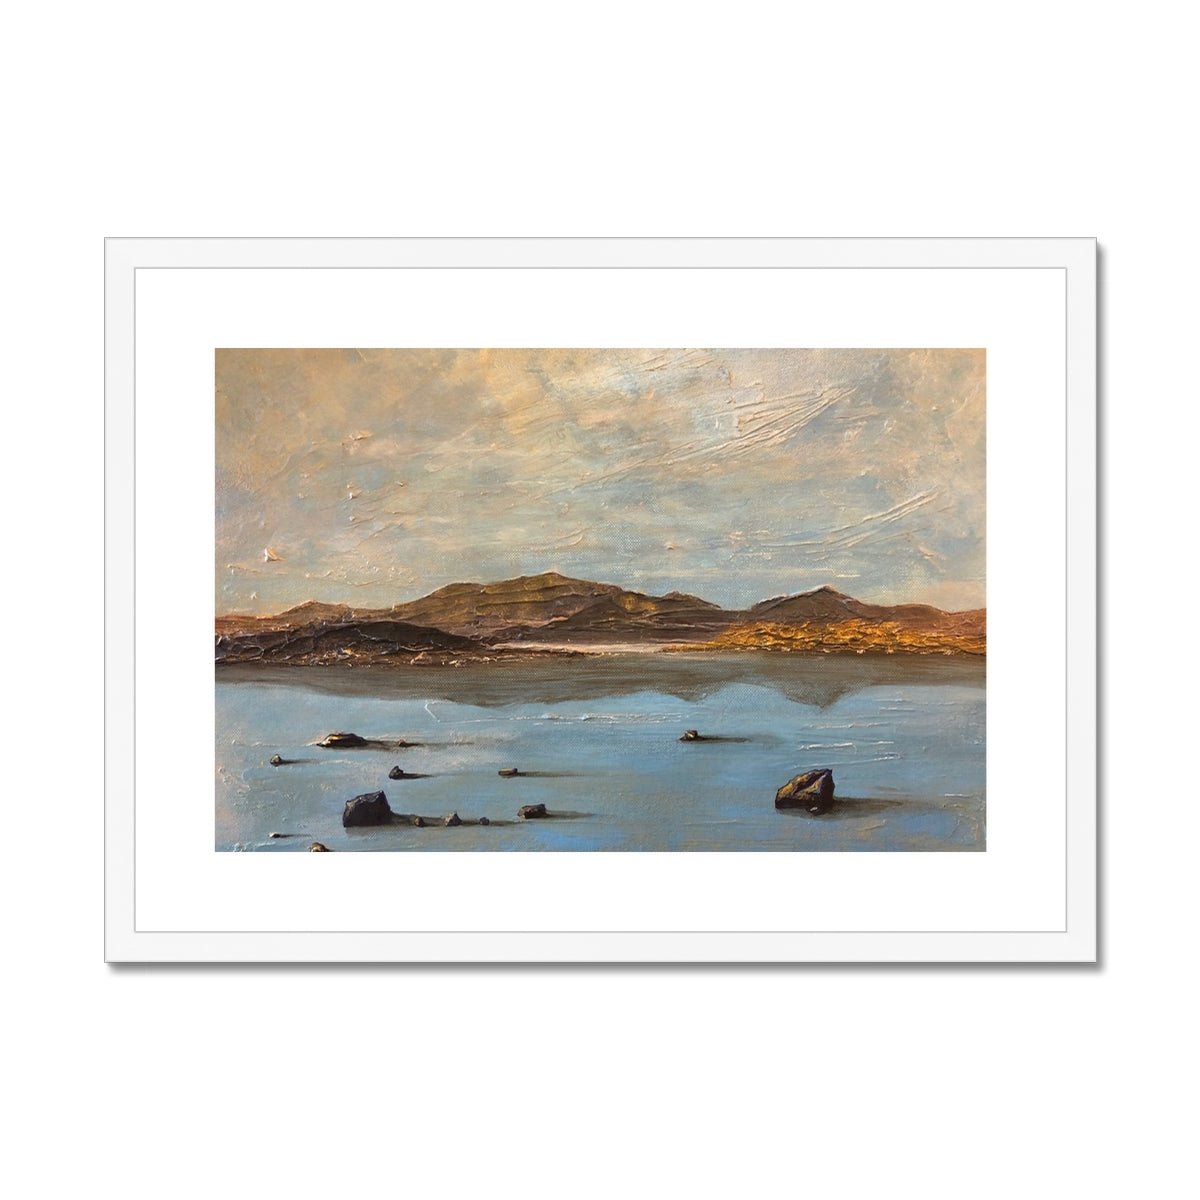 Loch Druidibeg South Uist Painting | Framed & Mounted Prints From Scotland-Framed & Mounted Prints-Scottish Lochs Art Gallery-A2 Landscape-White Frame-Paintings, Prints, Homeware, Art Gifts From Scotland By Scottish Artist Kevin Hunter